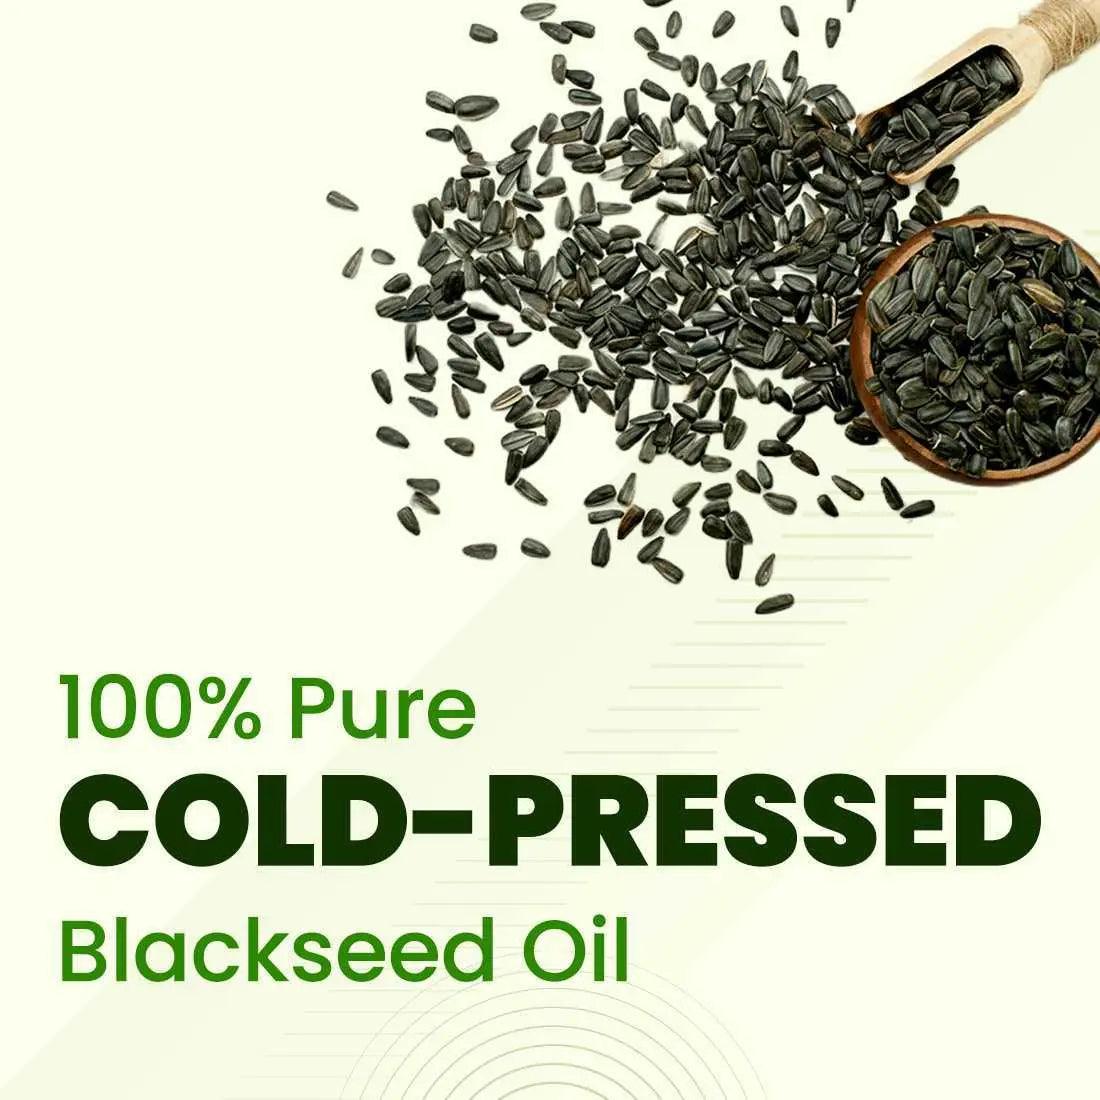 Nature Sure Kalonji Tail (Blackseed Oil) - 100% Pure and Cold-Pressed - 110ml